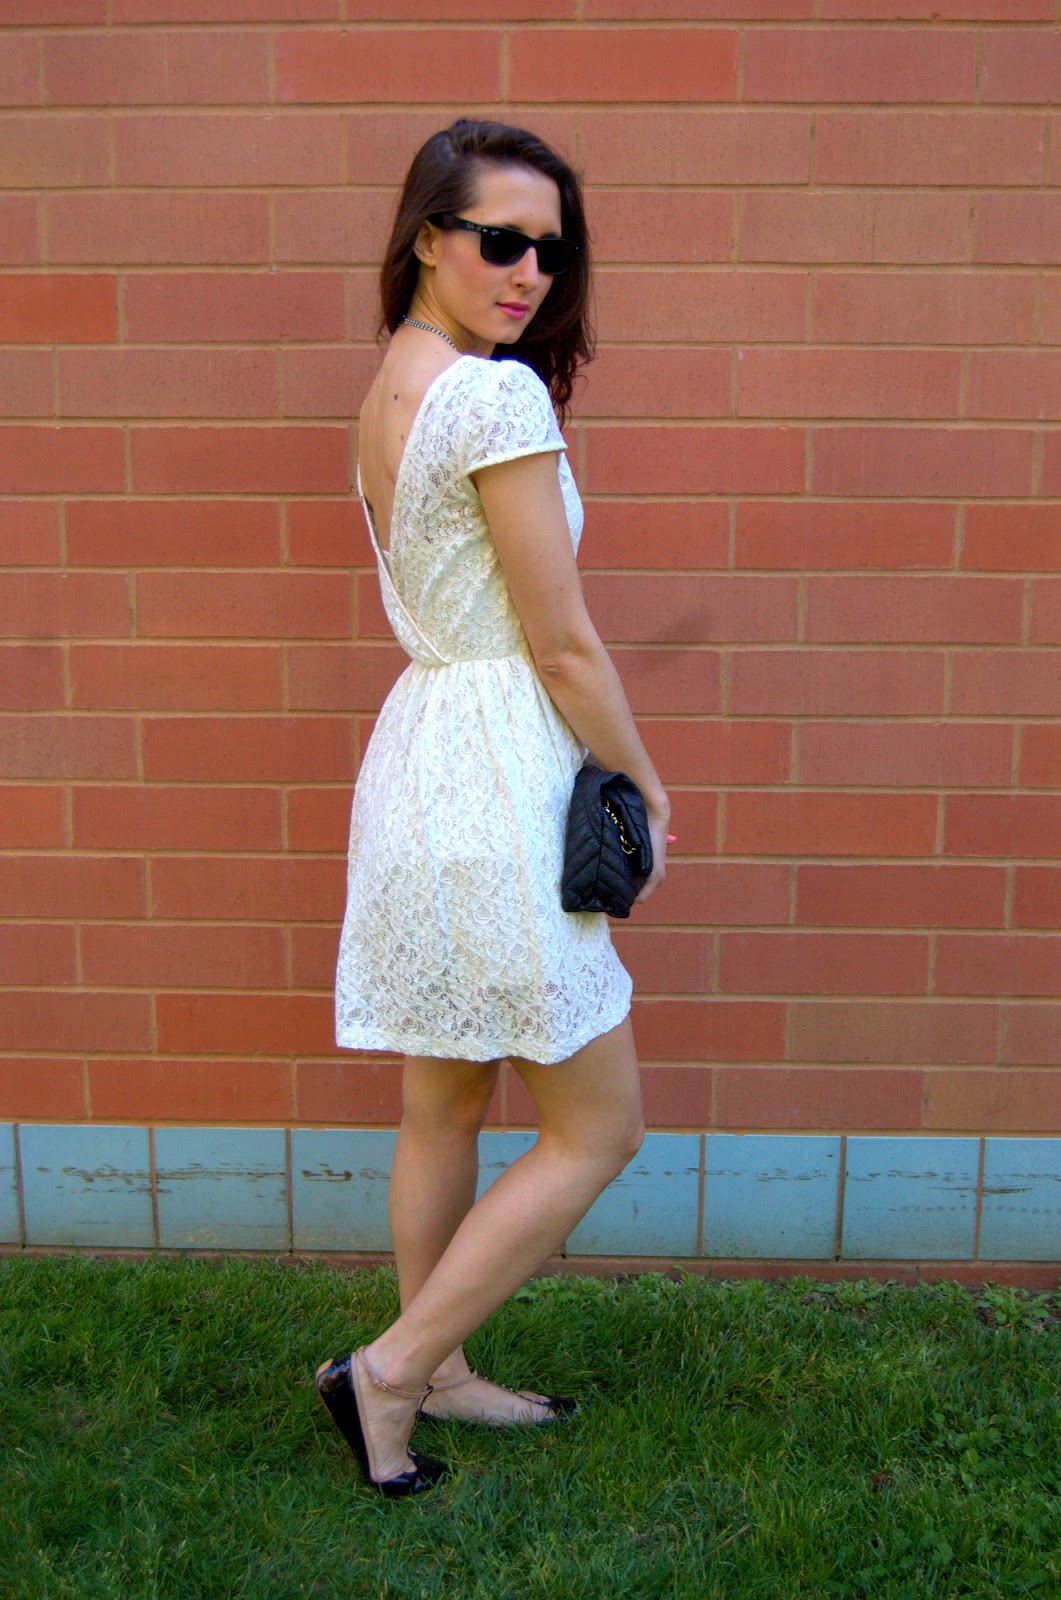 Fashion and Beats: Real: How to wear a white lace dress1061 x 1600